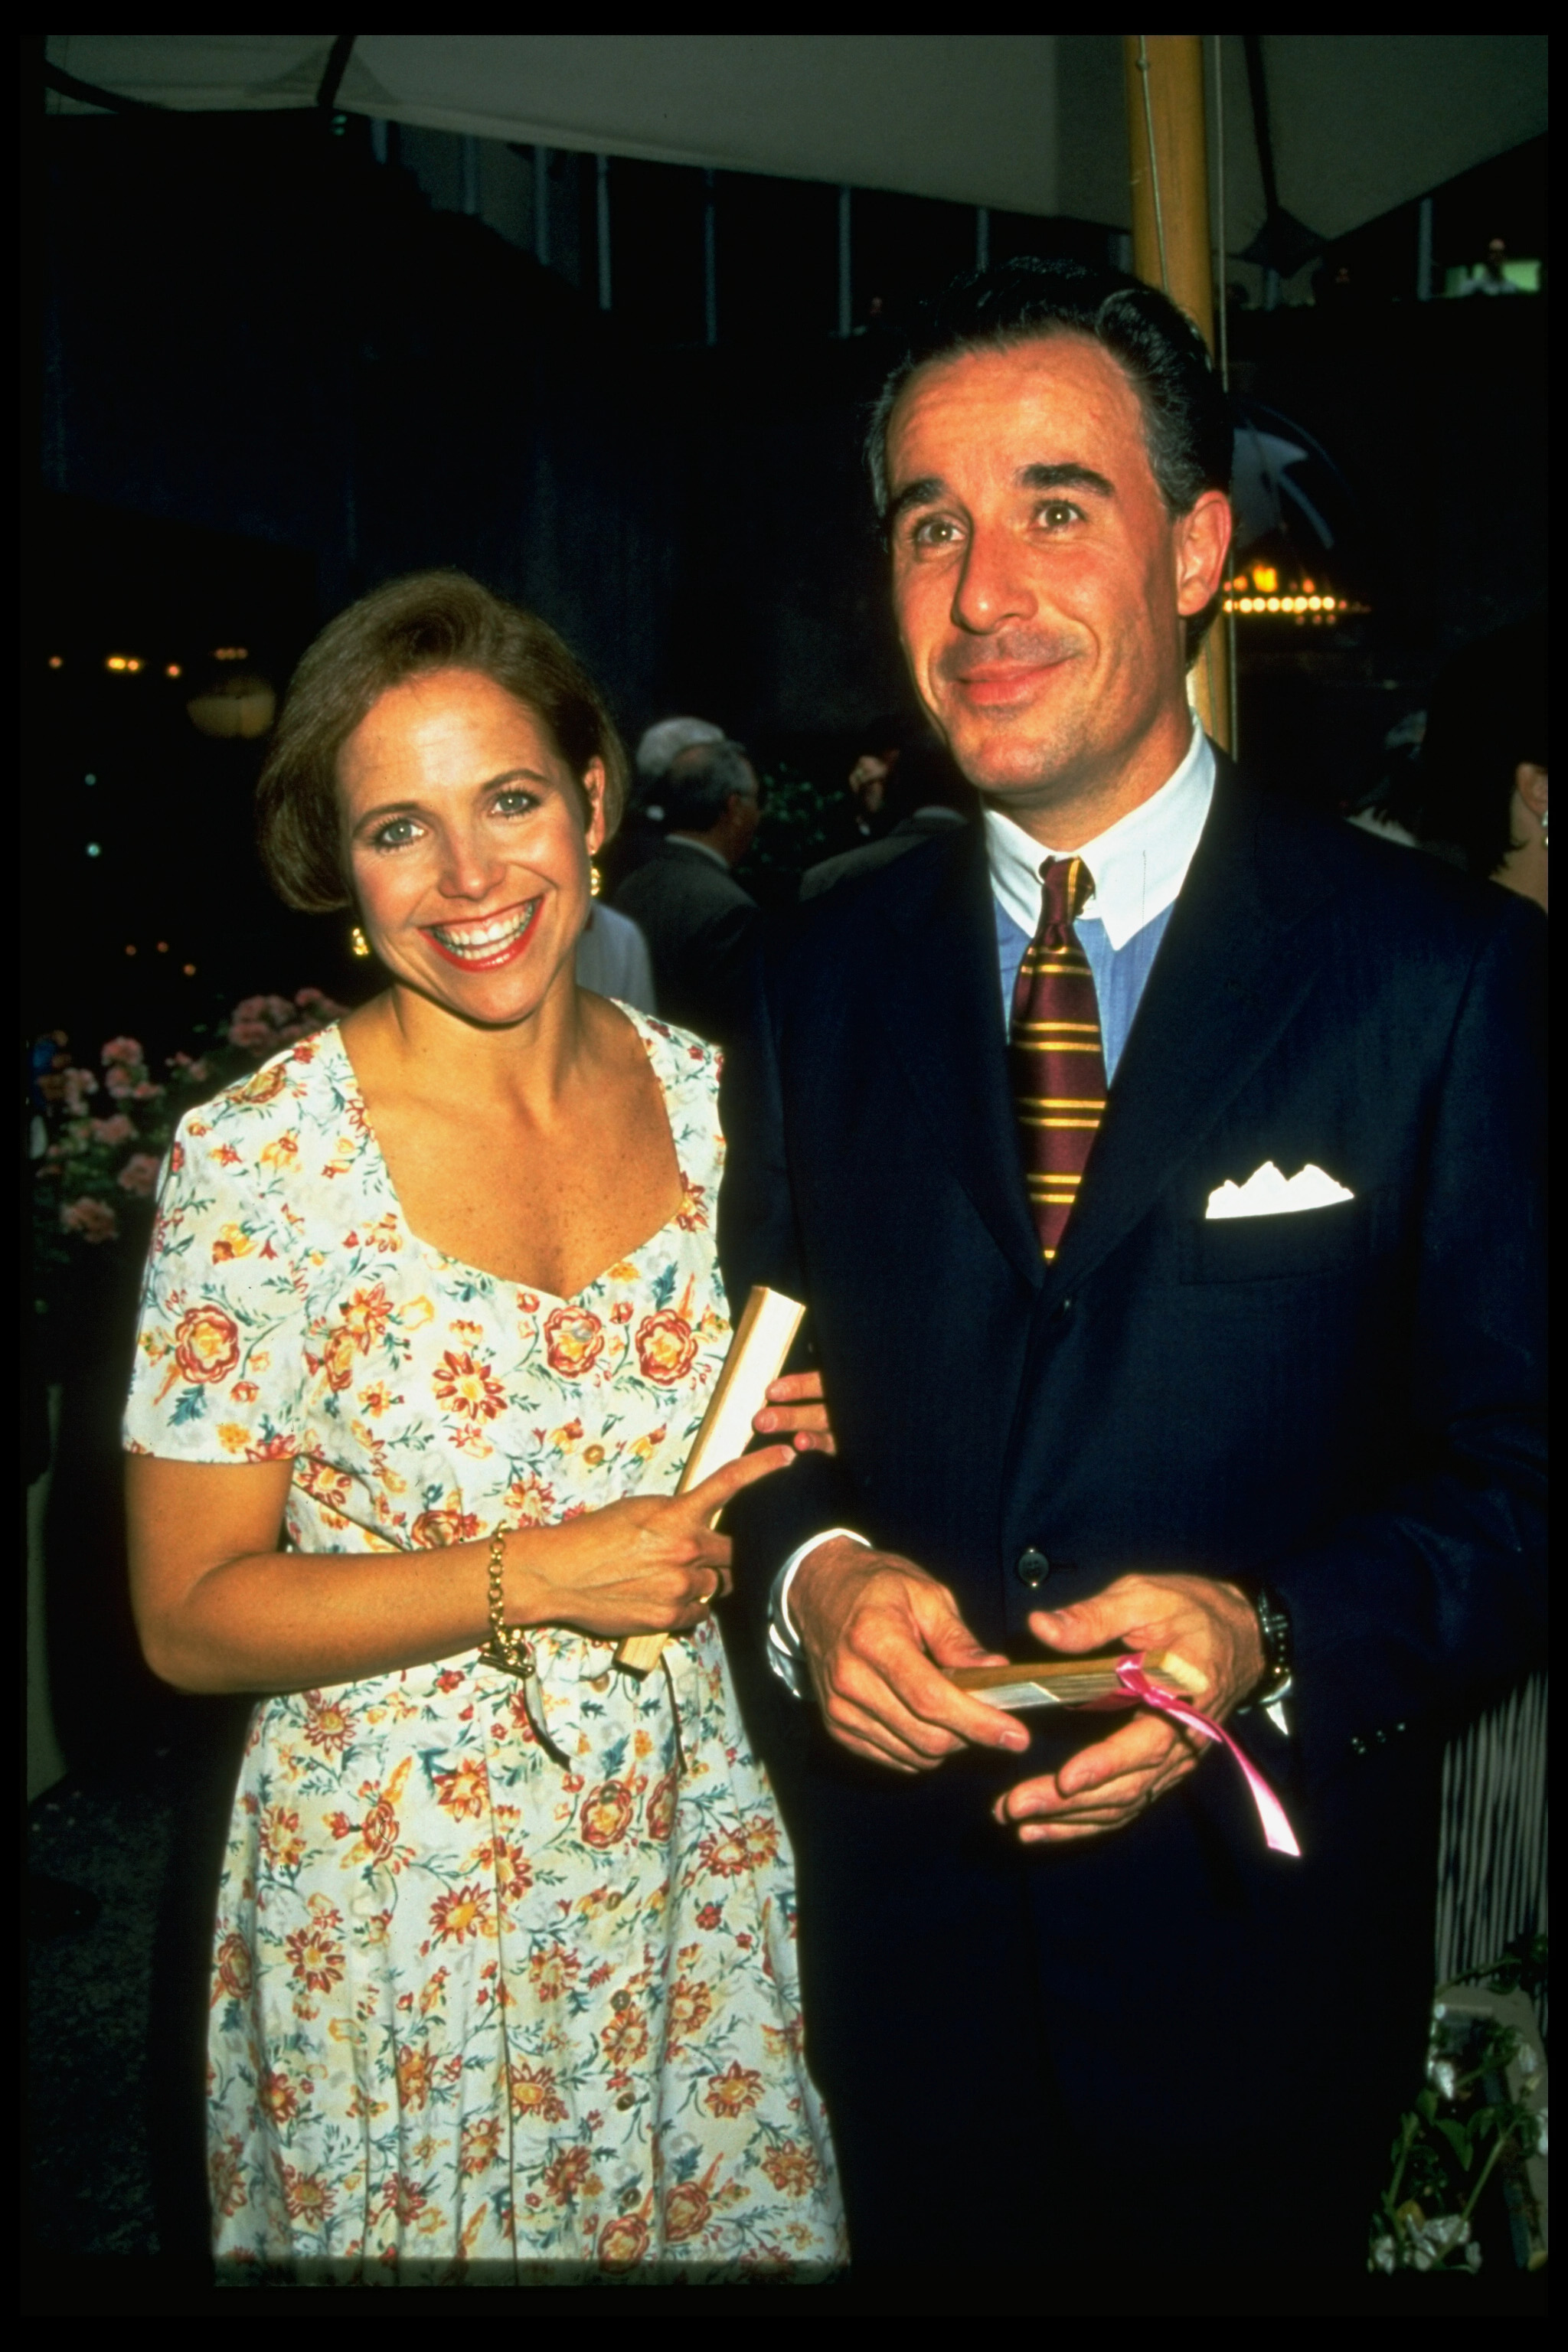 <p><span>On Jan. 24, 1998, Katie Couric's husband of nine years, lawyer and NBC News legal analyst Jay Monahan passed away at 42 from colon cancer. </span></p><p><span>"I was so worried about letting go of hope, because I didn't want Jay to spend whatever time he had left just waiting to die," Katie told </span><a href="https://people.com/tv/katie-couric-reflects-husband-jay-monahan-death-from-cancer/">People</a><span> magazine in 2021. "I think it takes extraordinary courage to be able to face death, and I think I was too scared, honestly." </span></p><p><span>The journalist has moved on, marrying John Molner in 2014, but lives with the lessons of being a widow. "I understand the fragility of life in a way that will always be with me," she says. "It also makes me realize the futility of being mad at somebody, of petty arguments. I always think about what David Cassidy said on his deathbed: 'So much wasted time.'" Katie sought treatment for the disease herself after being diagnosed with breast cancer in 2022.</span></p>